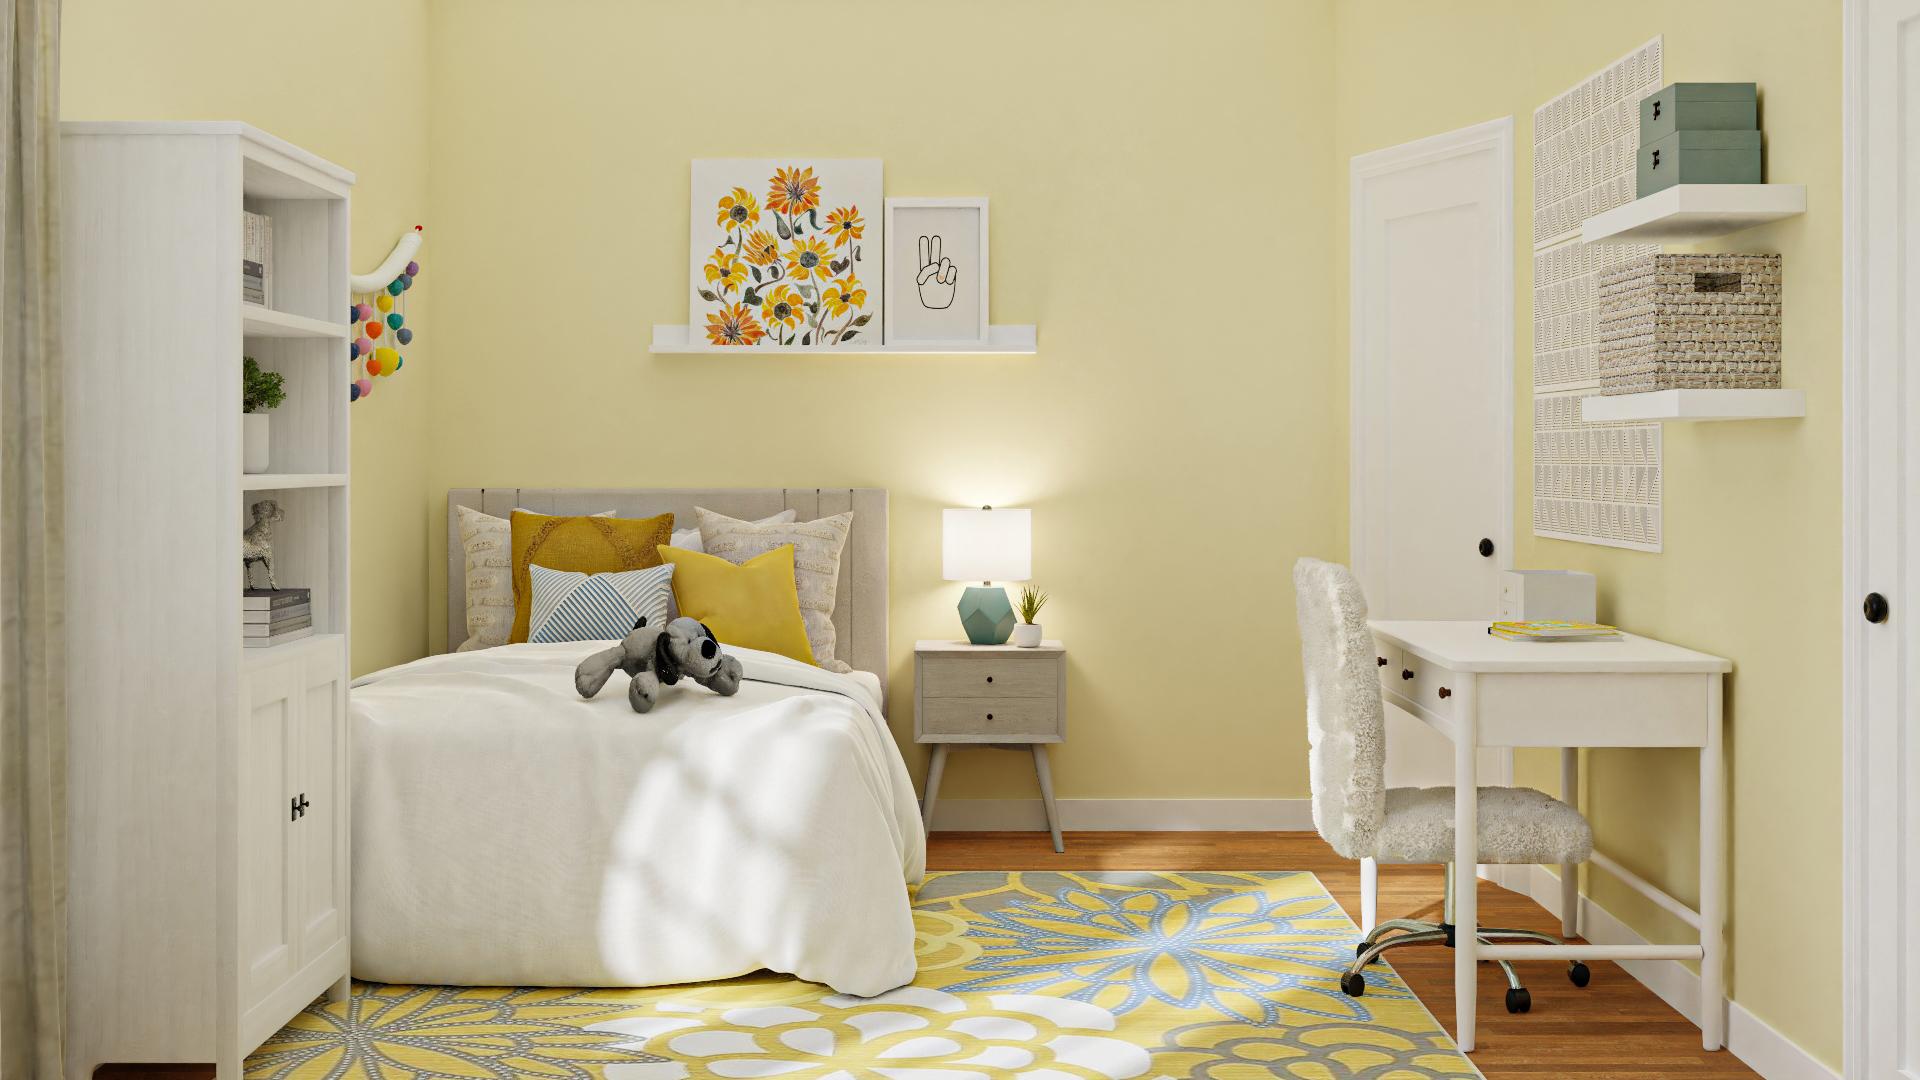 An Eclectic Bedroom Beaming In Cheerful Sunshine Yellows 